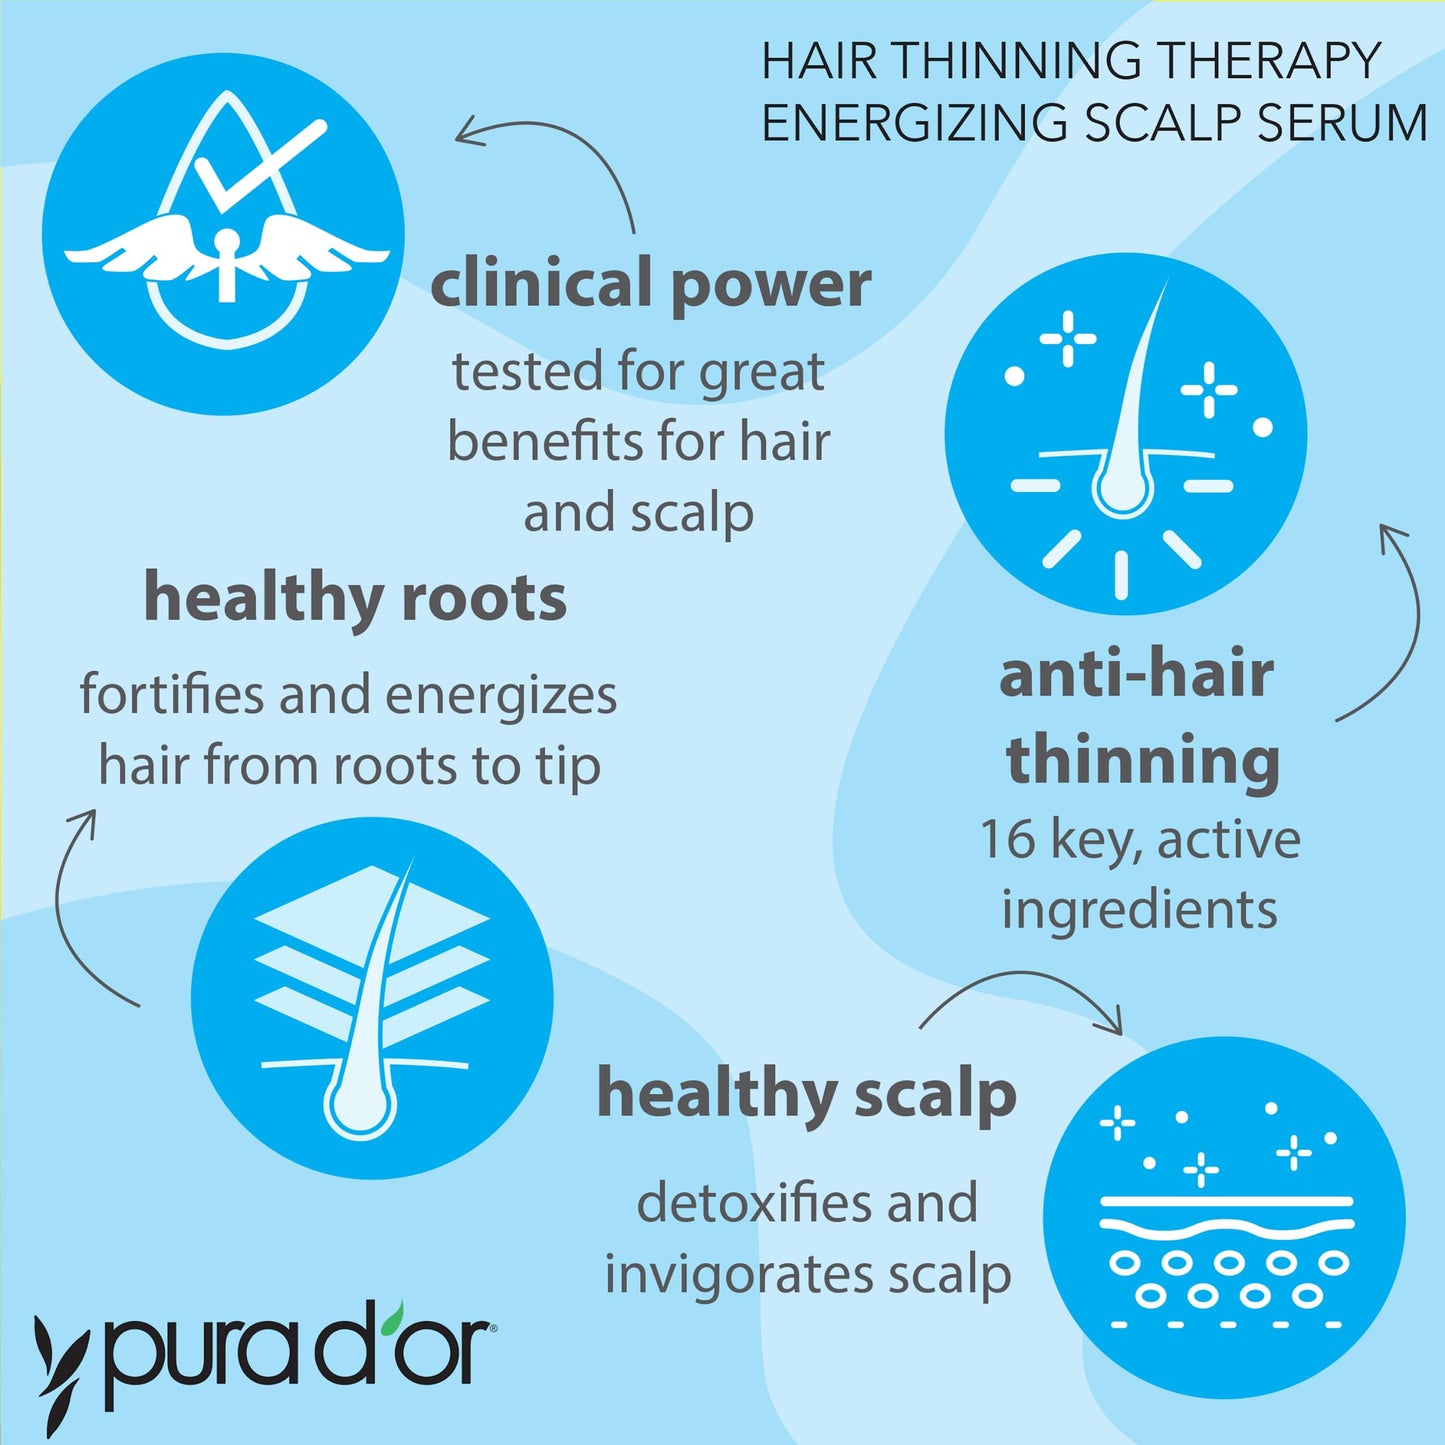 PURA D'OR Scalp Therapy Energizing Scalp Serum Revitalizer (4oz) with Argan Oil, Biotin, Caffeine, Stem Cell, Catalase & DHT Blockers, All Hair Types, Men & Women (Packaging may vary)